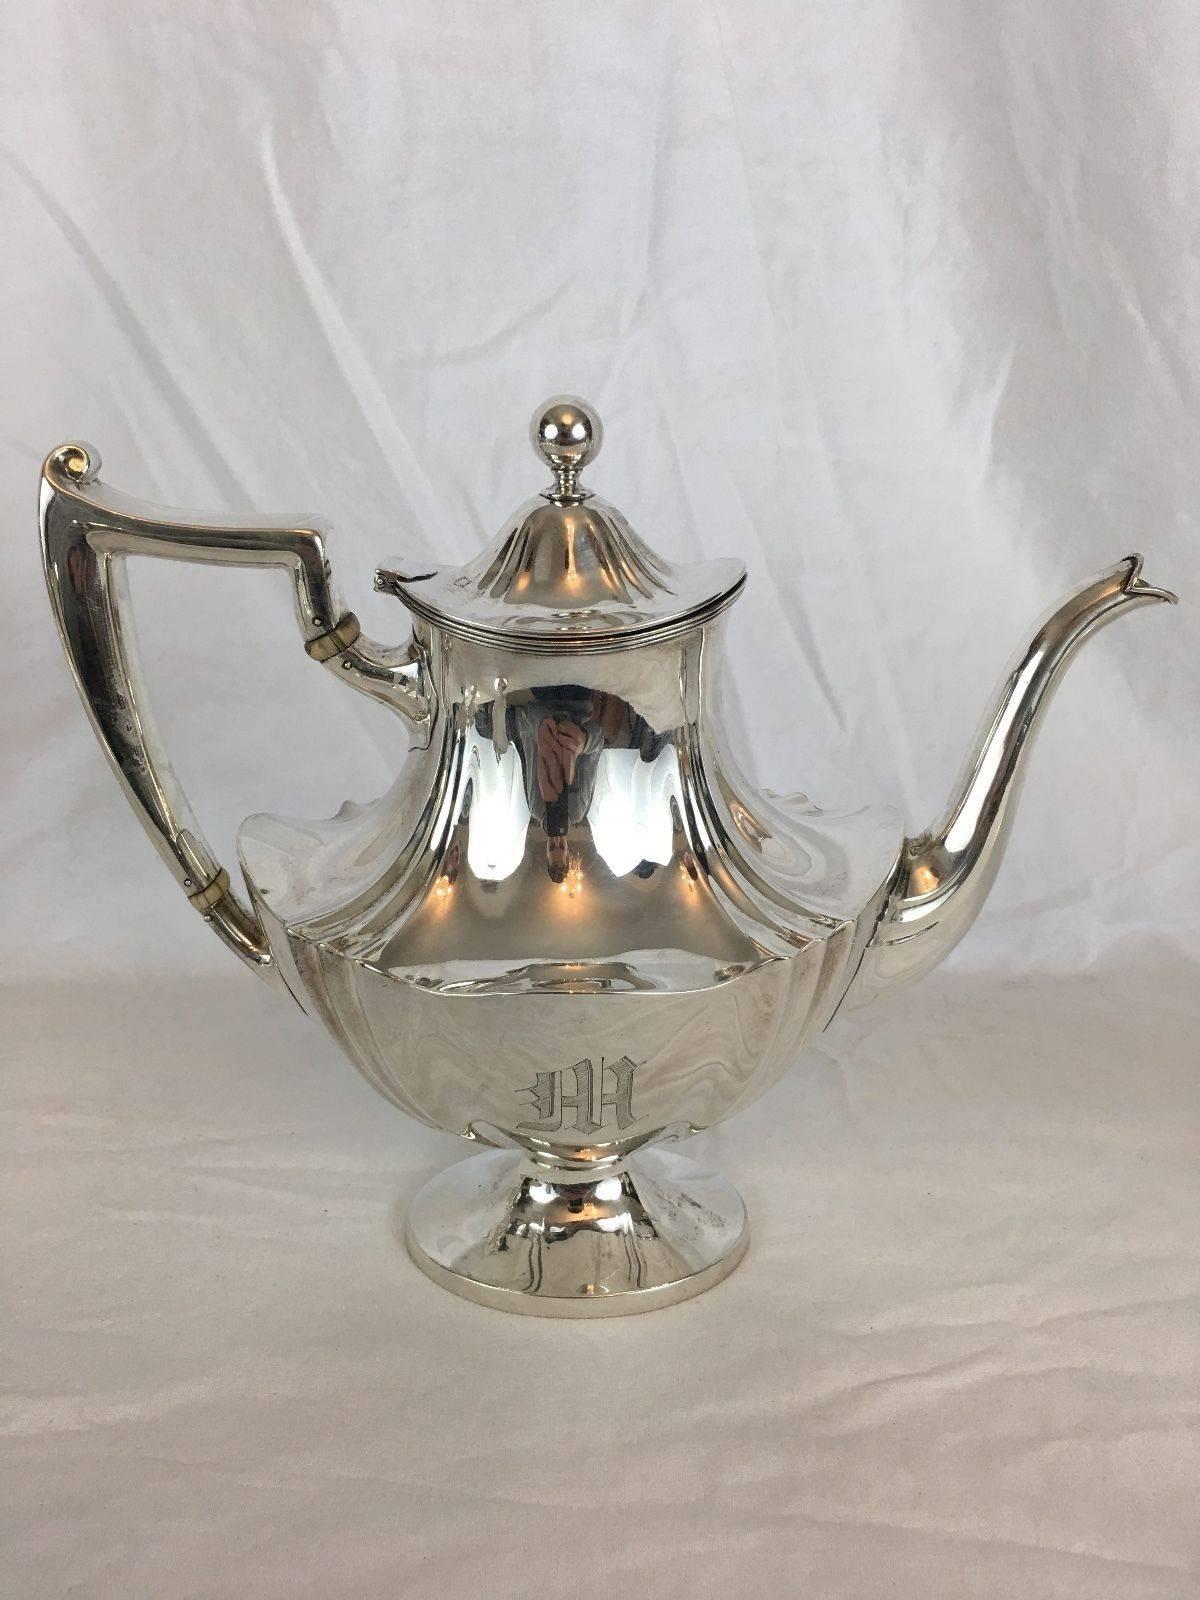 Whiting Manufacturing Co Tea & Coffee Service Sterling Silver, American (Nordamerikanisch)